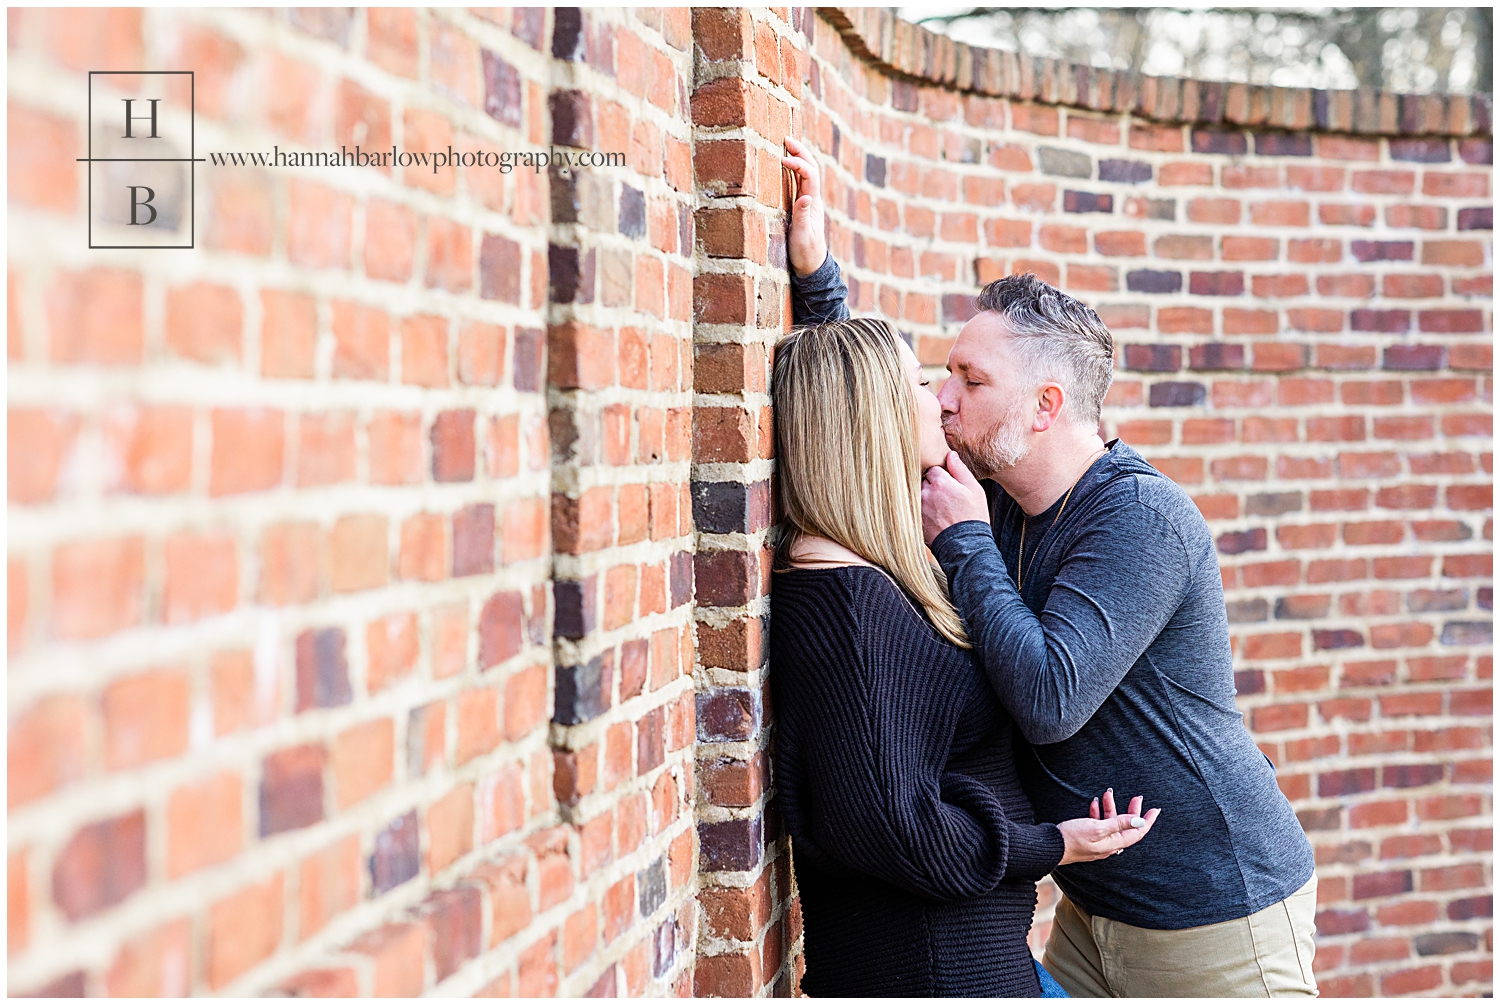 Groom to be embraces fiancé and brings chin in for a kiss against brick wall.